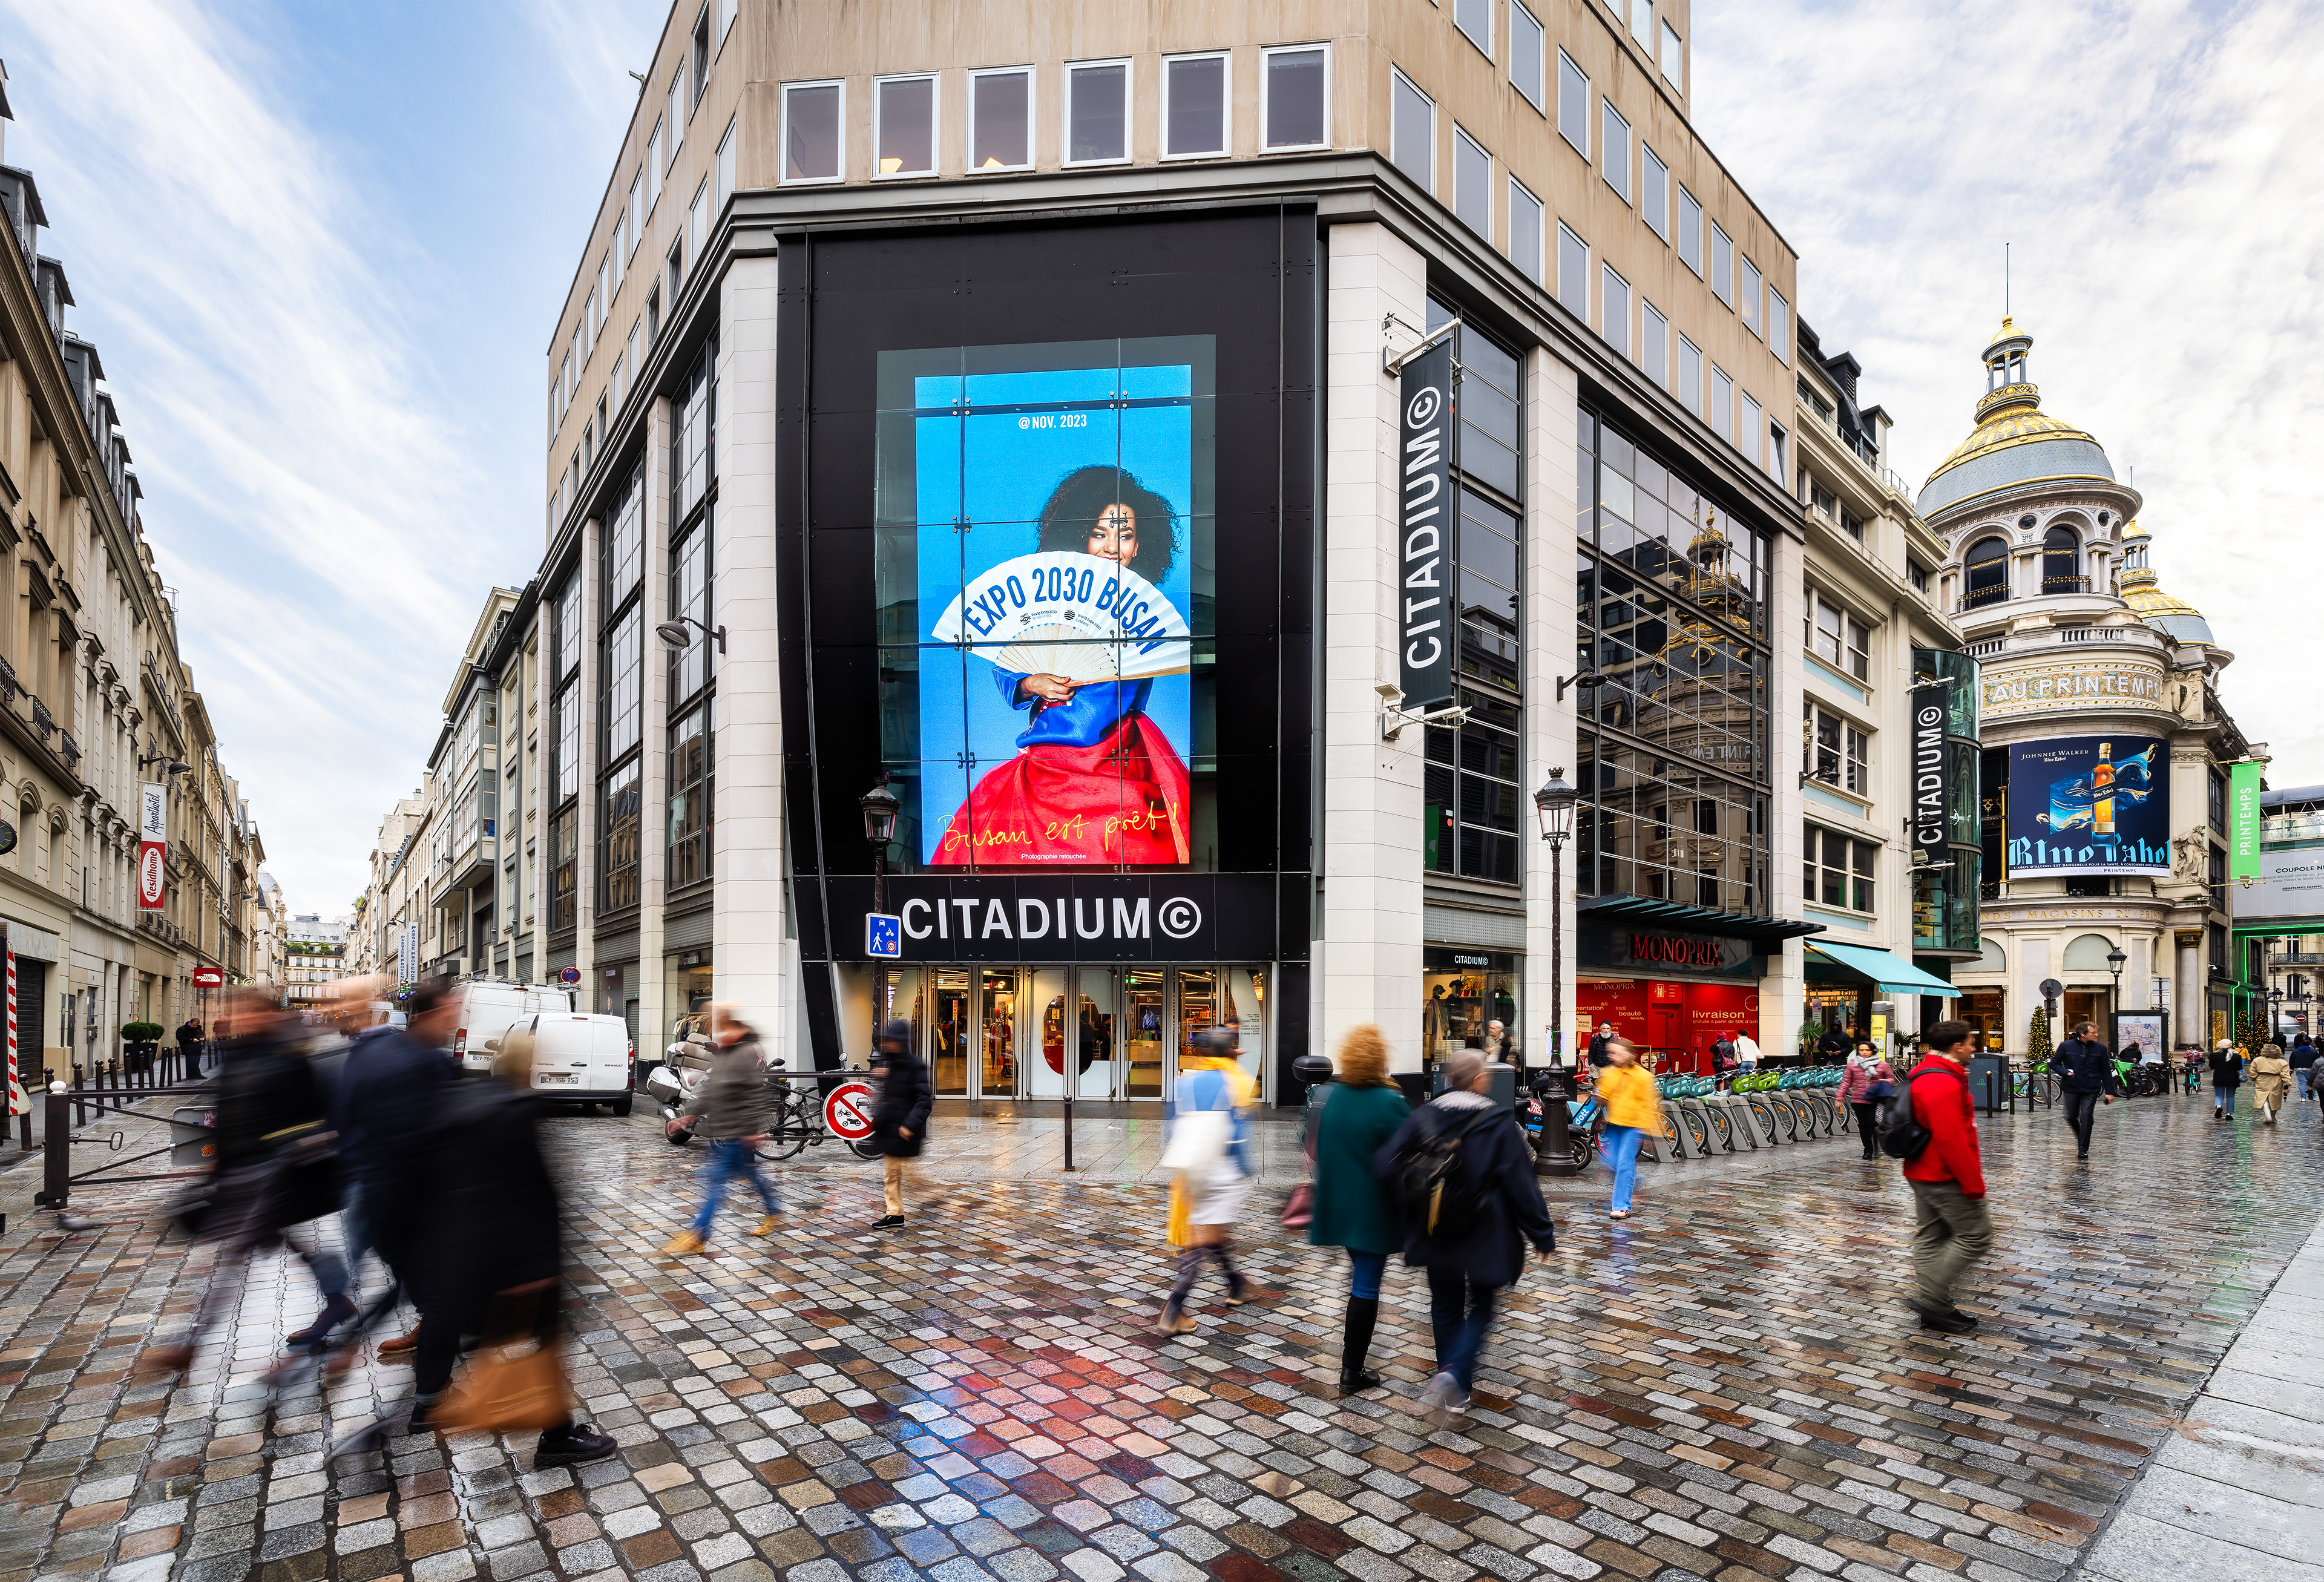 A massive ad for Busan's bid to host the 2030 World Expo is shown on the wall of the shopping mall Citadium Paris in the French capital. (Busan Metropolitan City)